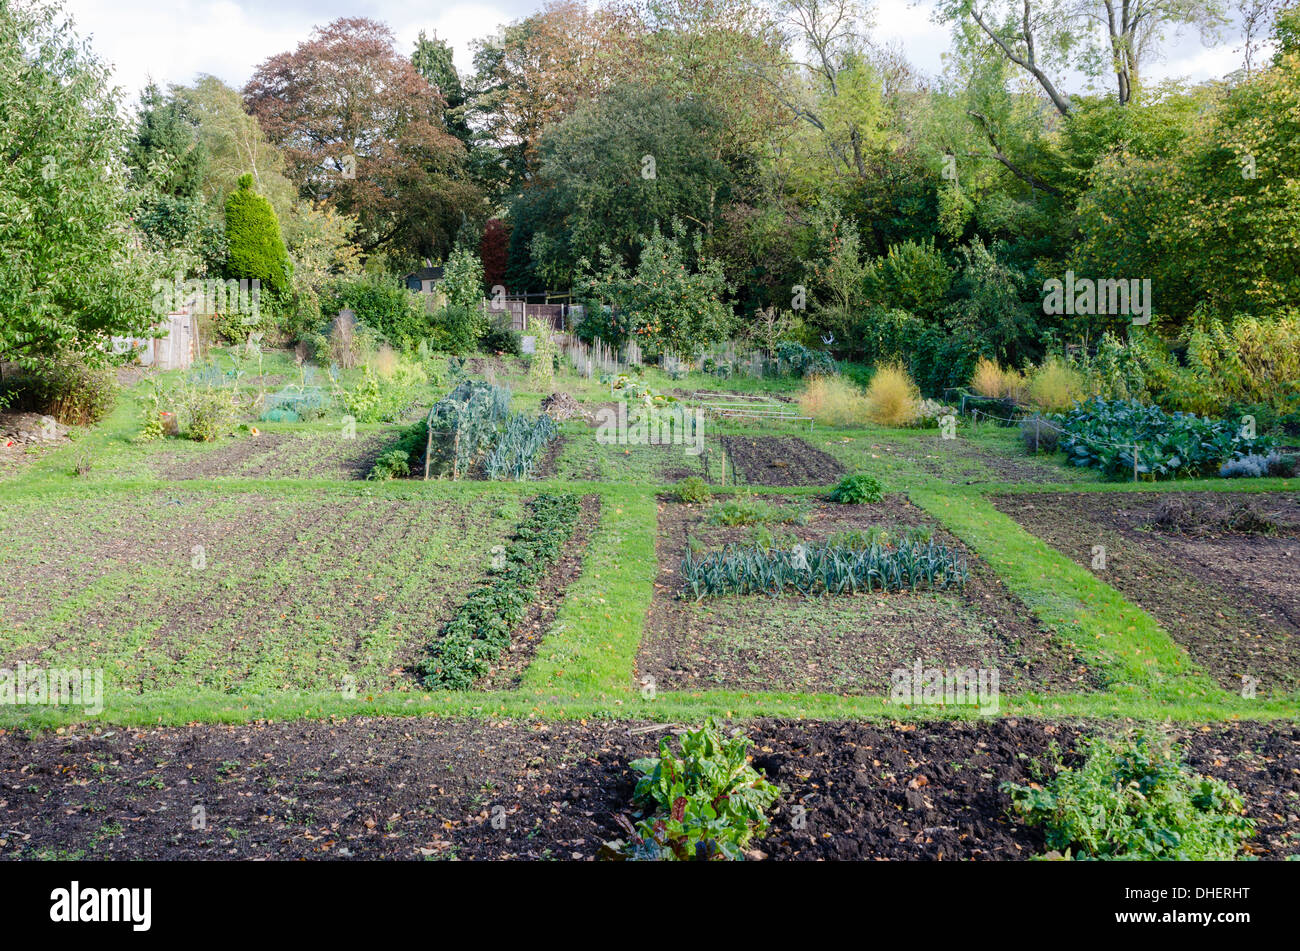 Large vegetable garden in the Gloucestershire town of Winchcombe Stock Photo